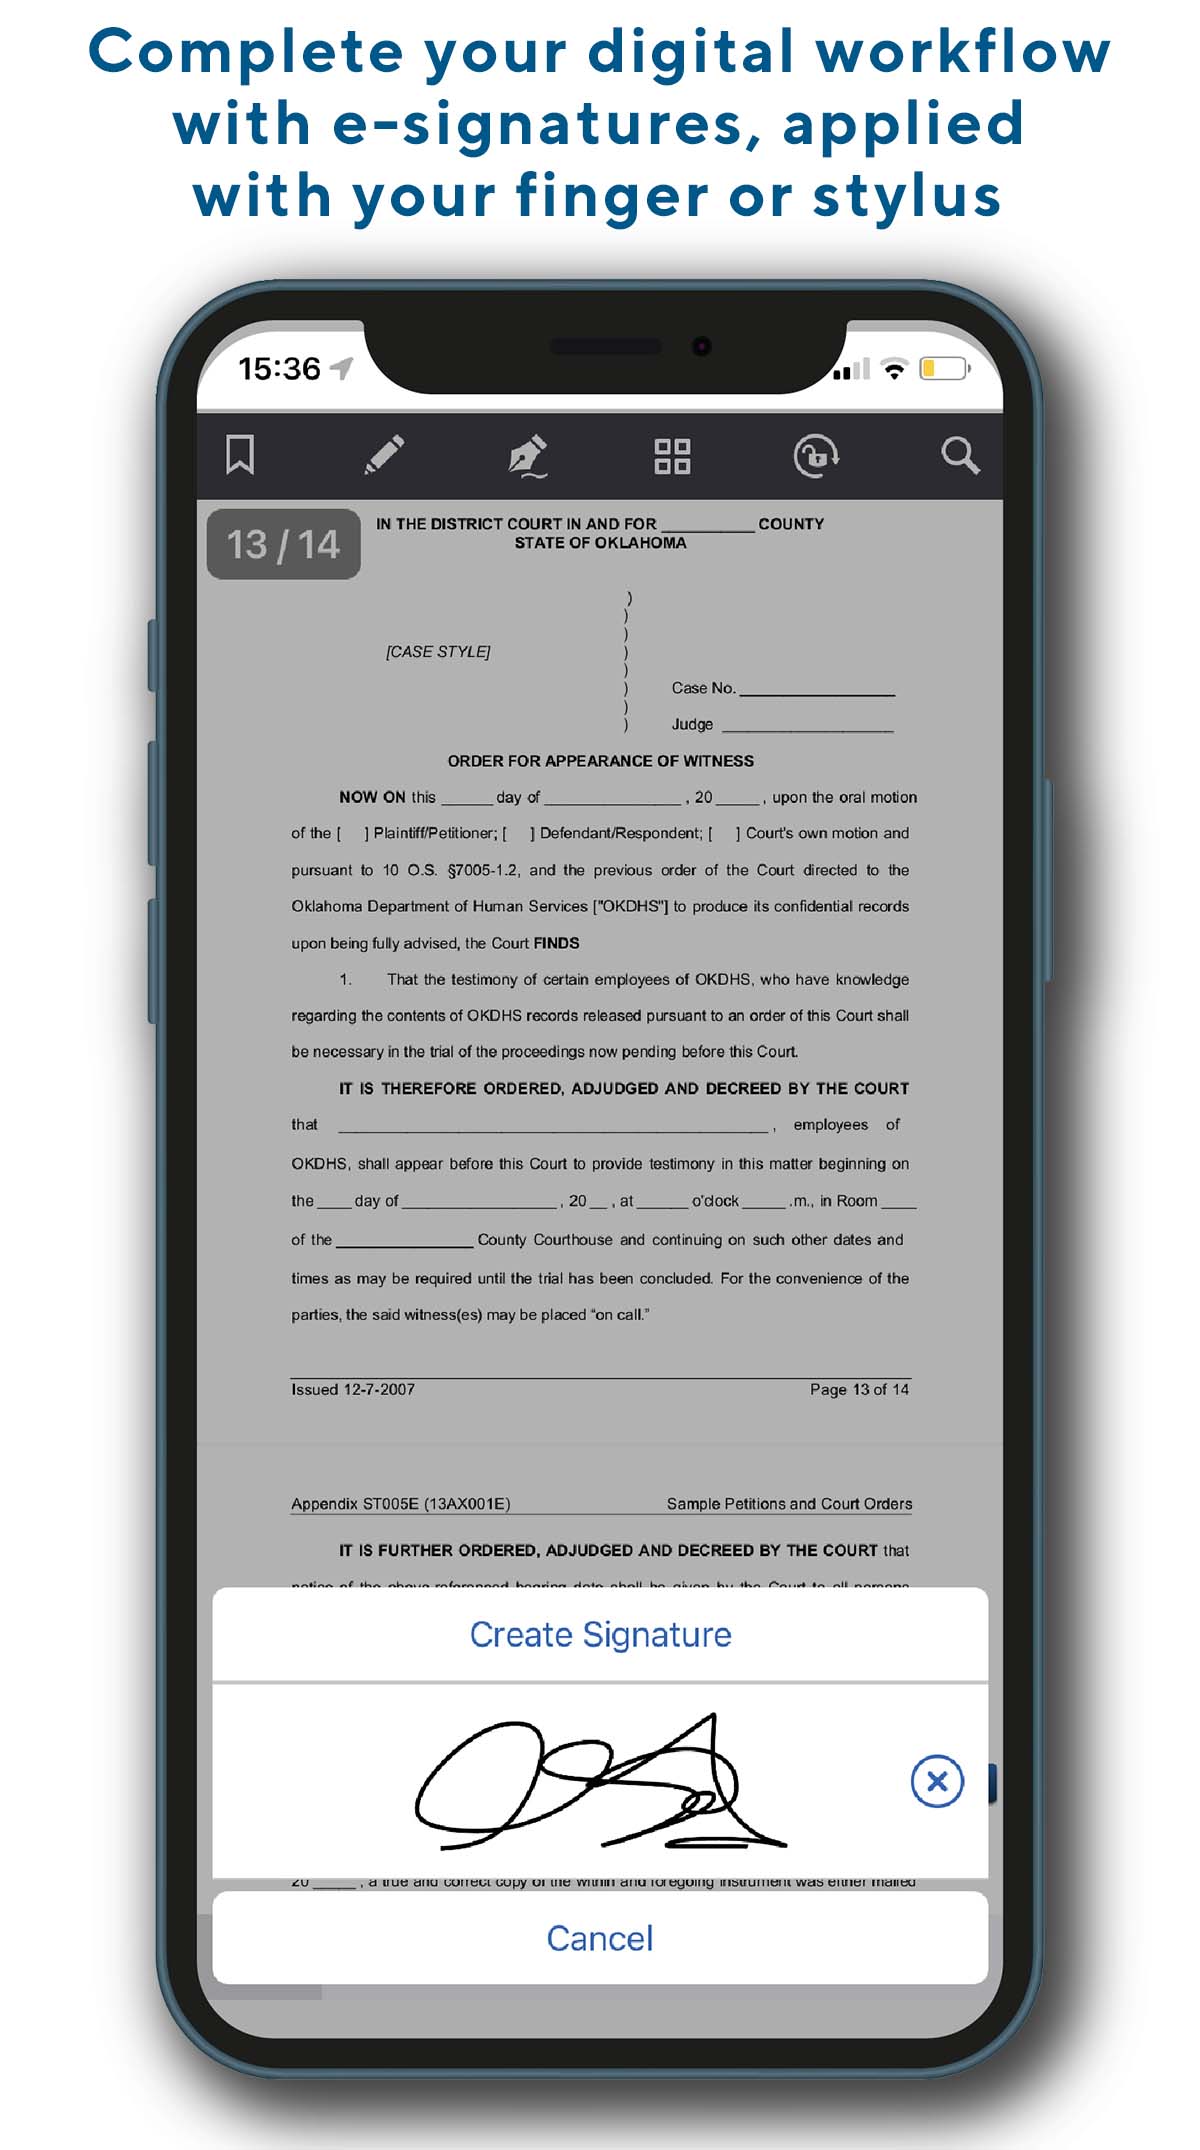 Complete your digital workflow with e-signatures, applied with your finger or stylus